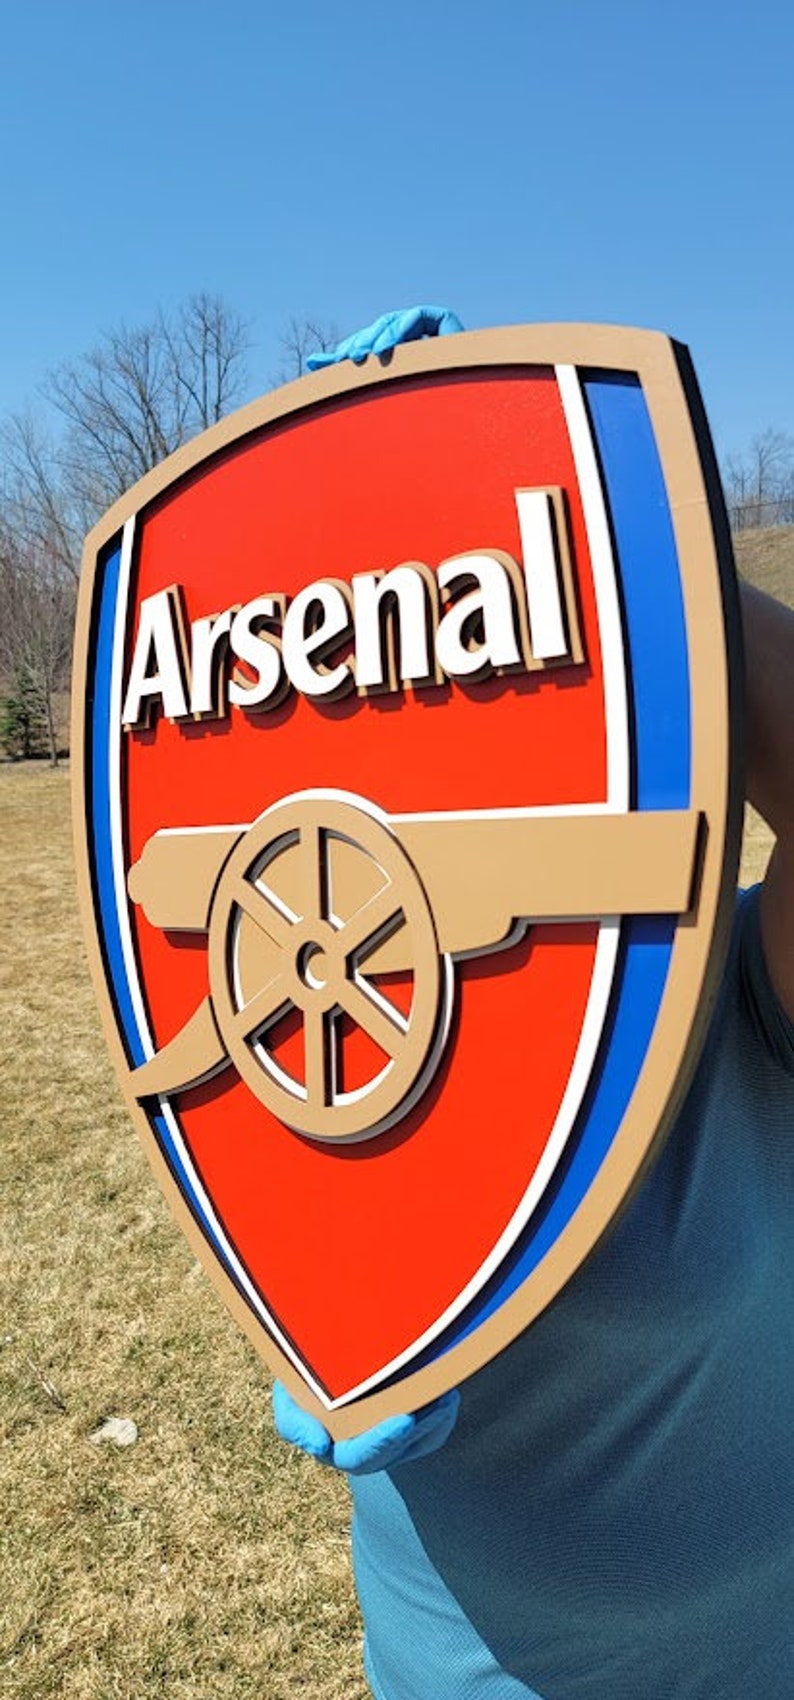 Arsenal Football Club Logo 3D Wooden Sign, Medallion Sports Sign for Man Cave, Home Decoration, Sports Fan Gift